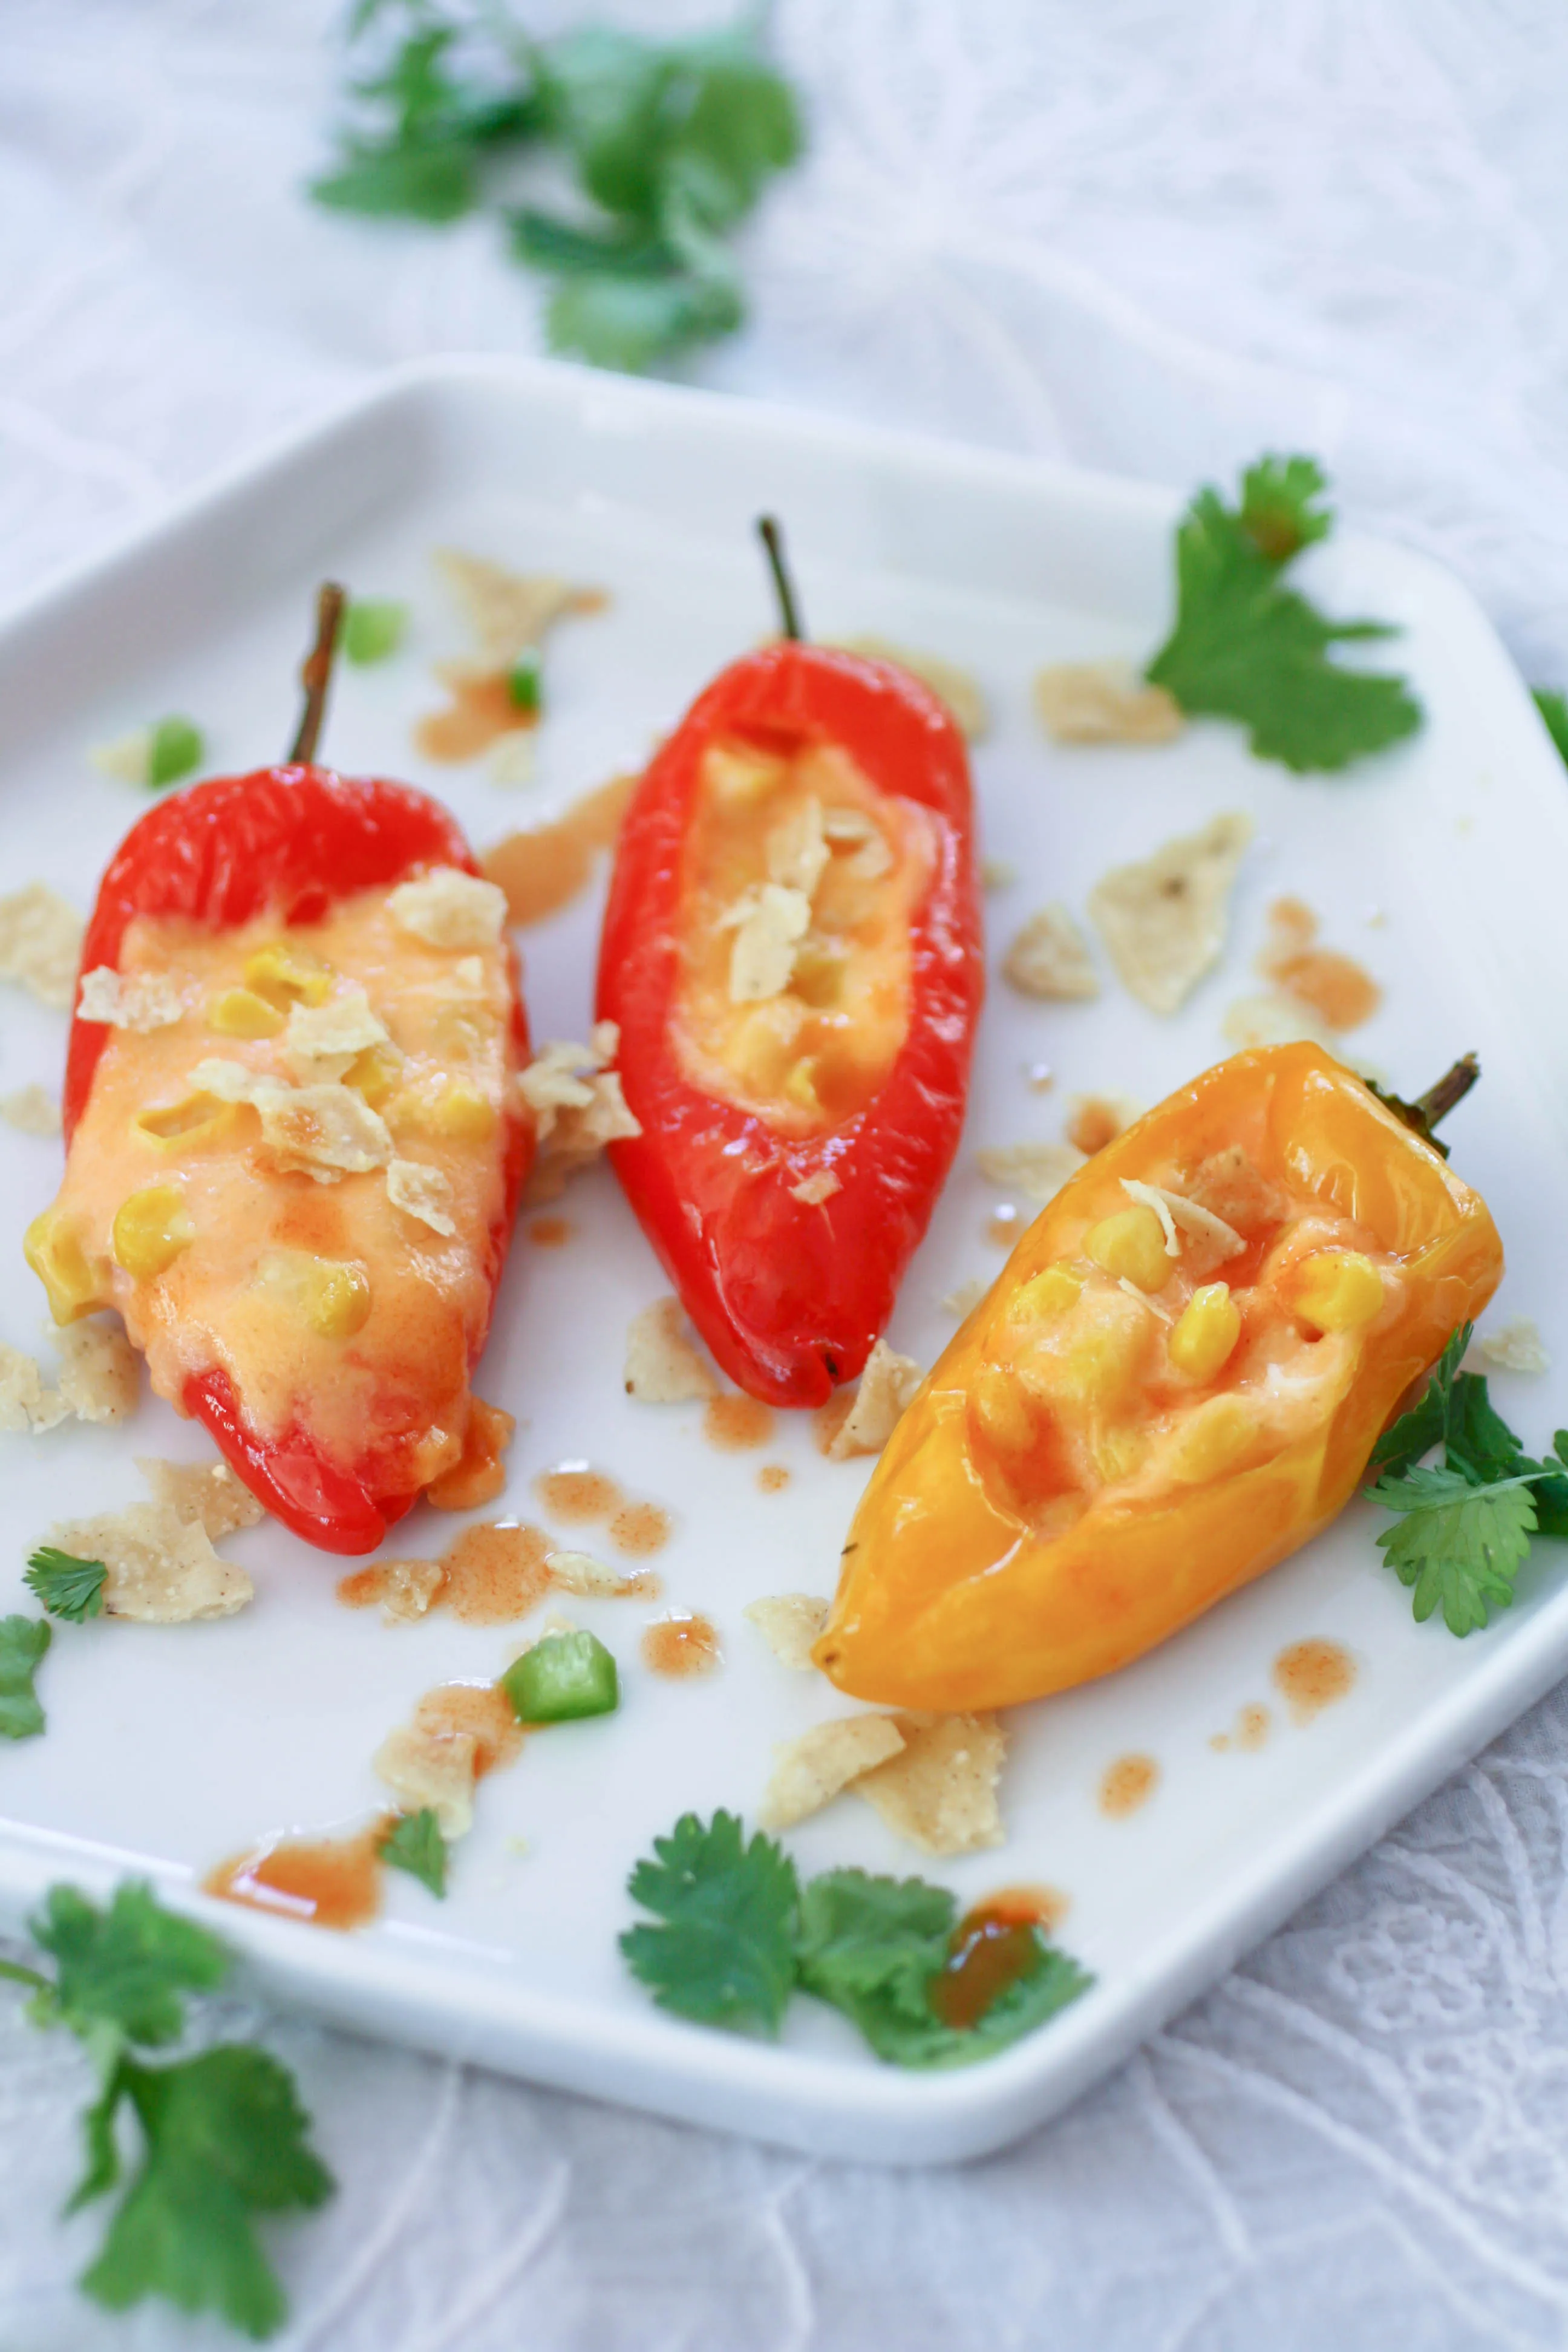 Cheesy Jalapeño & Corn Stuffed Sweet Pepper Poppers are a great appetizer any time of year! Cheesy Jalapeño & Corn Stuffed Sweet Pepper Poppers are super tasty!